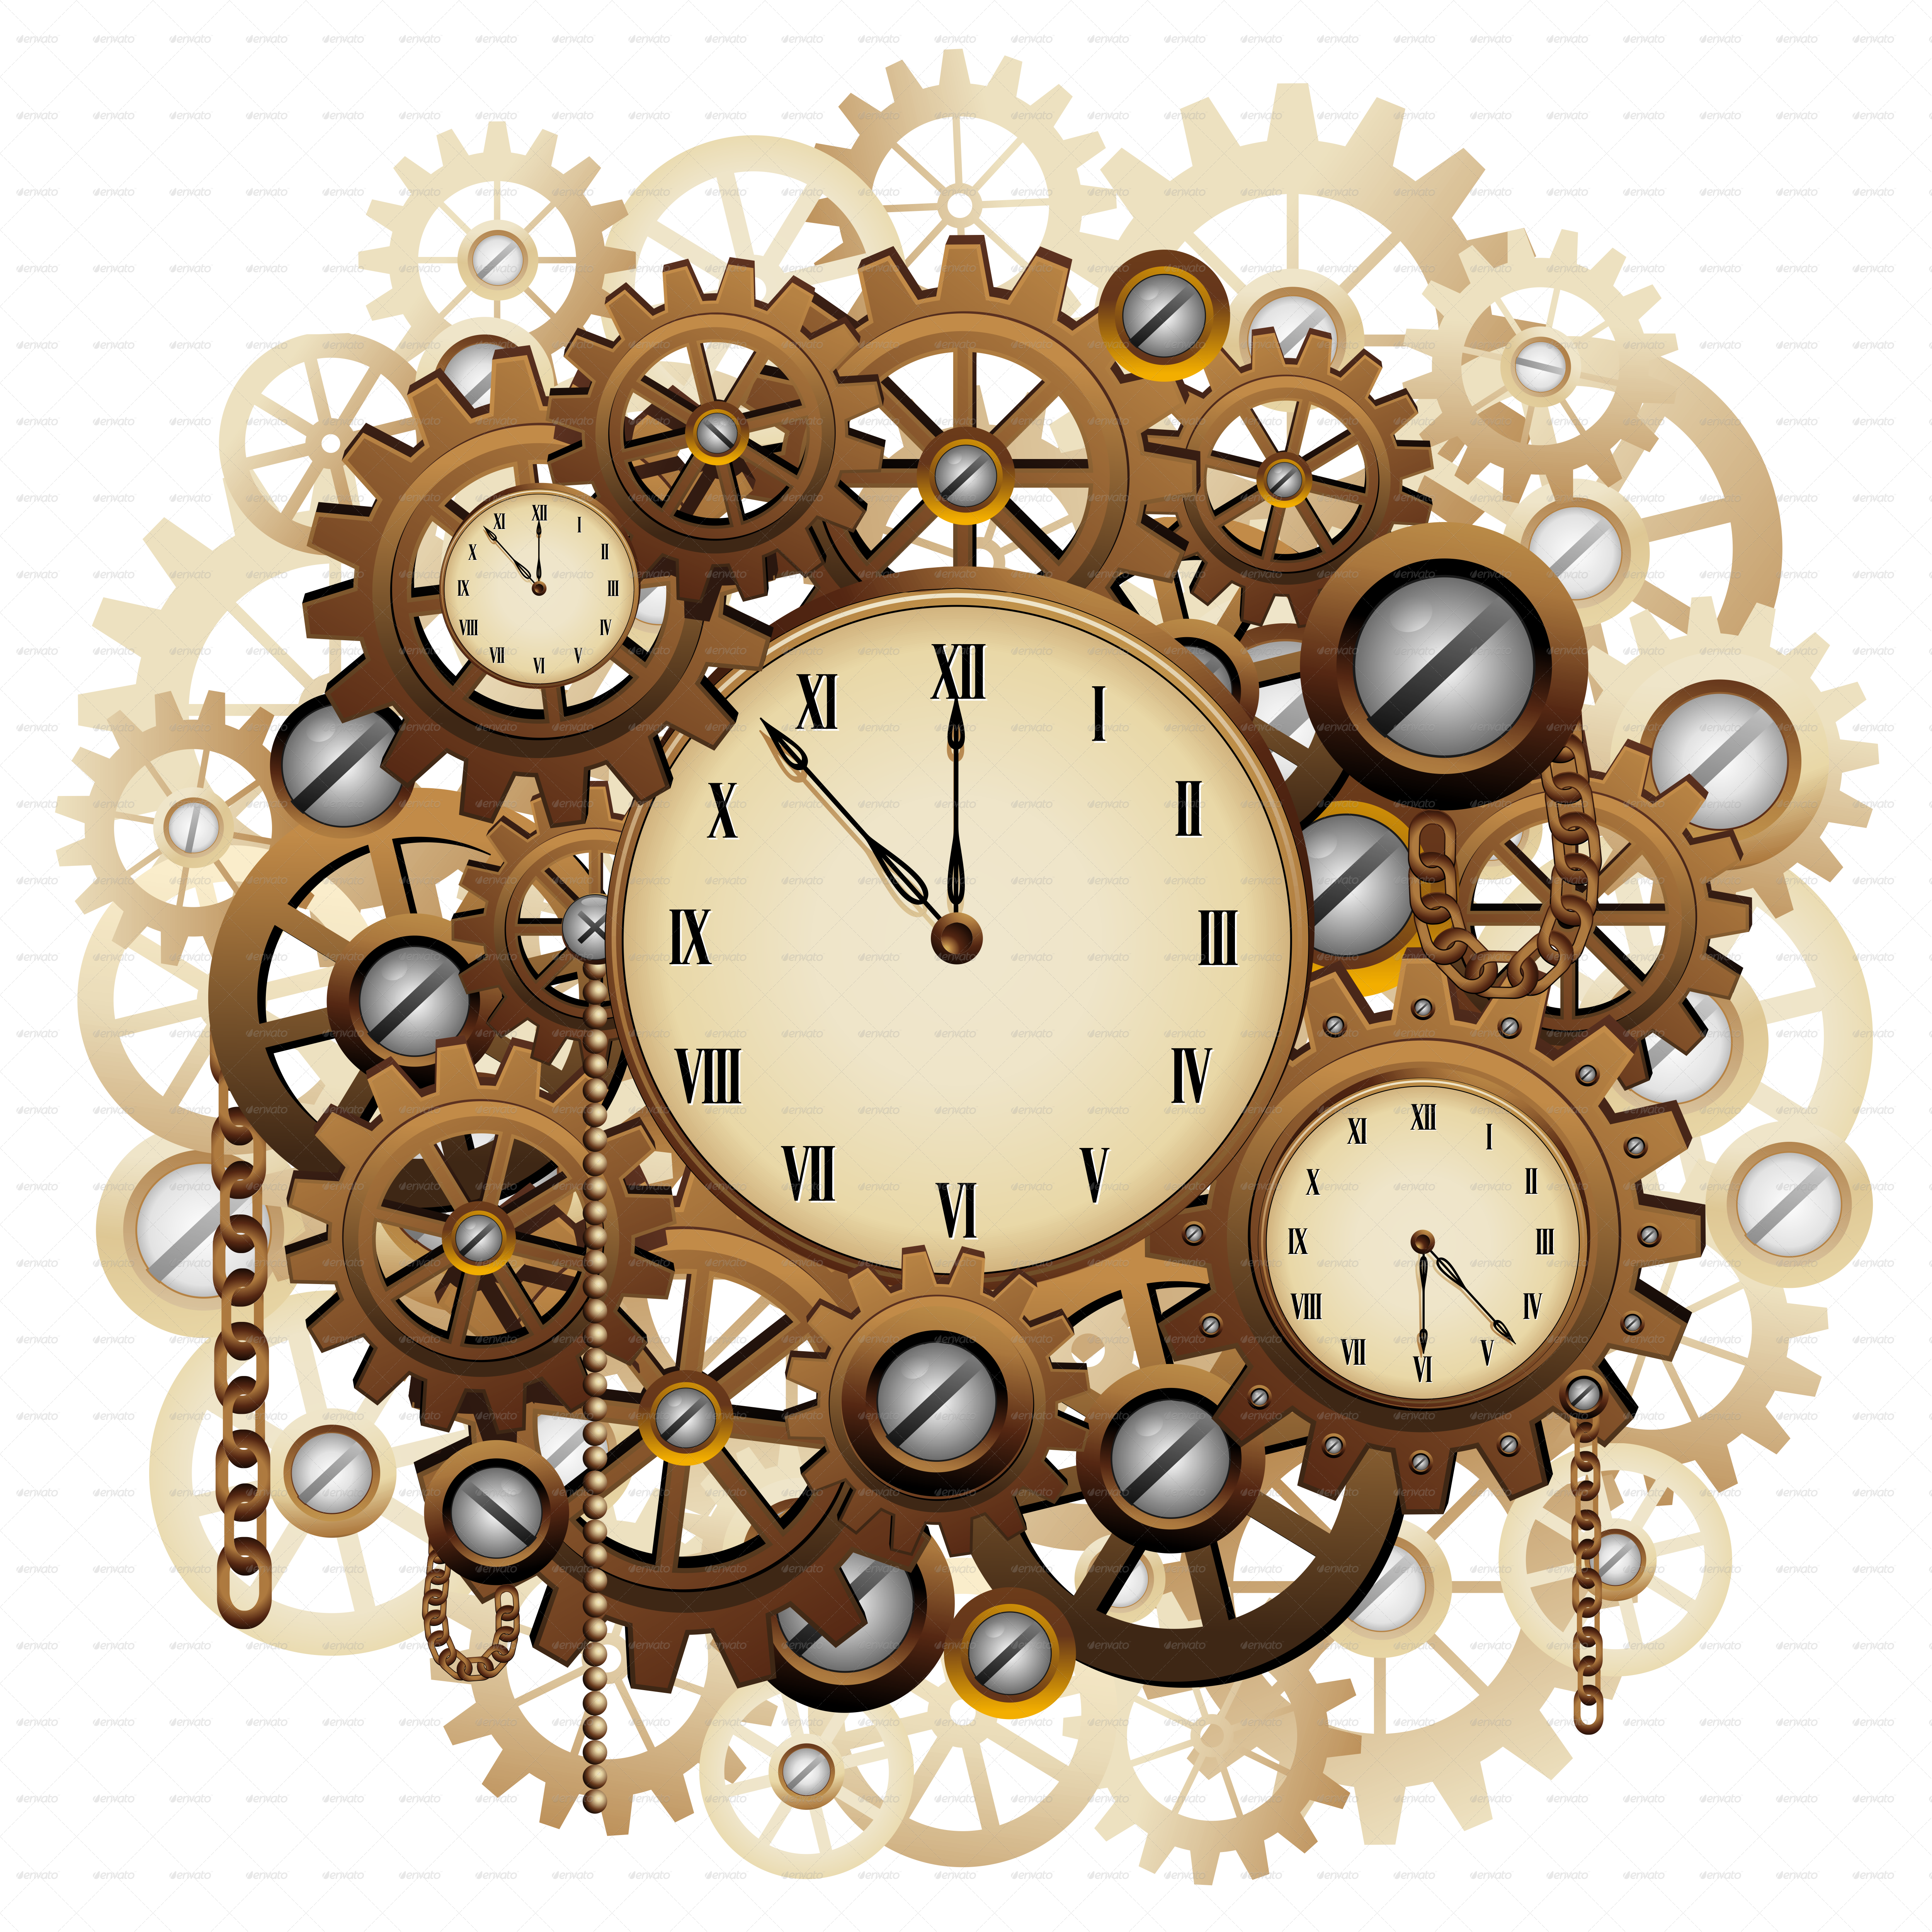 Steampunk Style Clocks and Gears, Vectors GraphicRiver